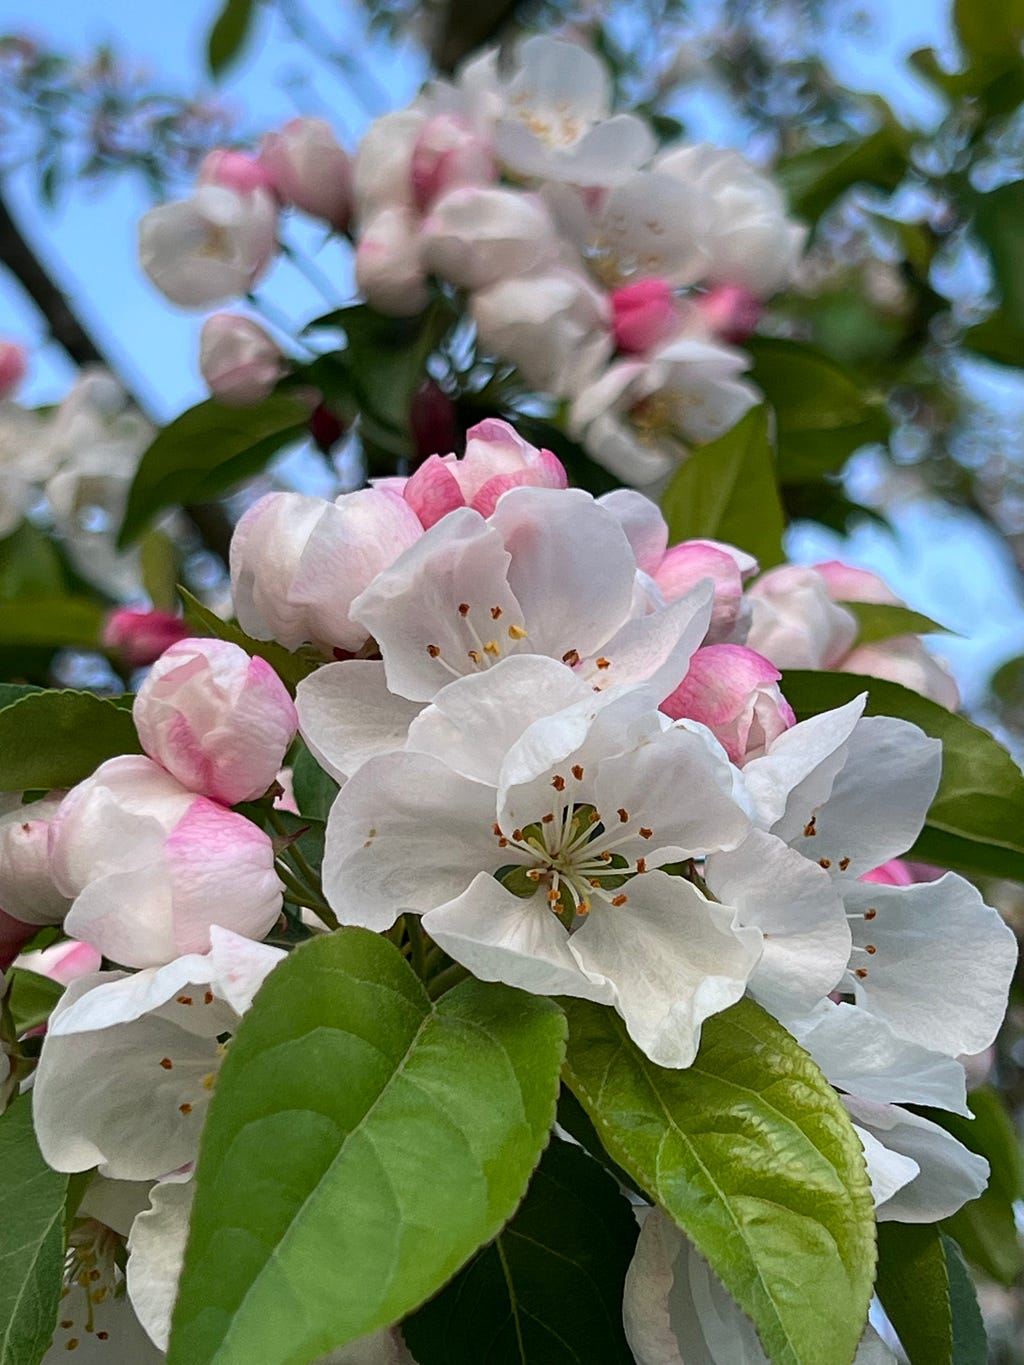 White crabapple blossoms tinged with pink, open and opening.